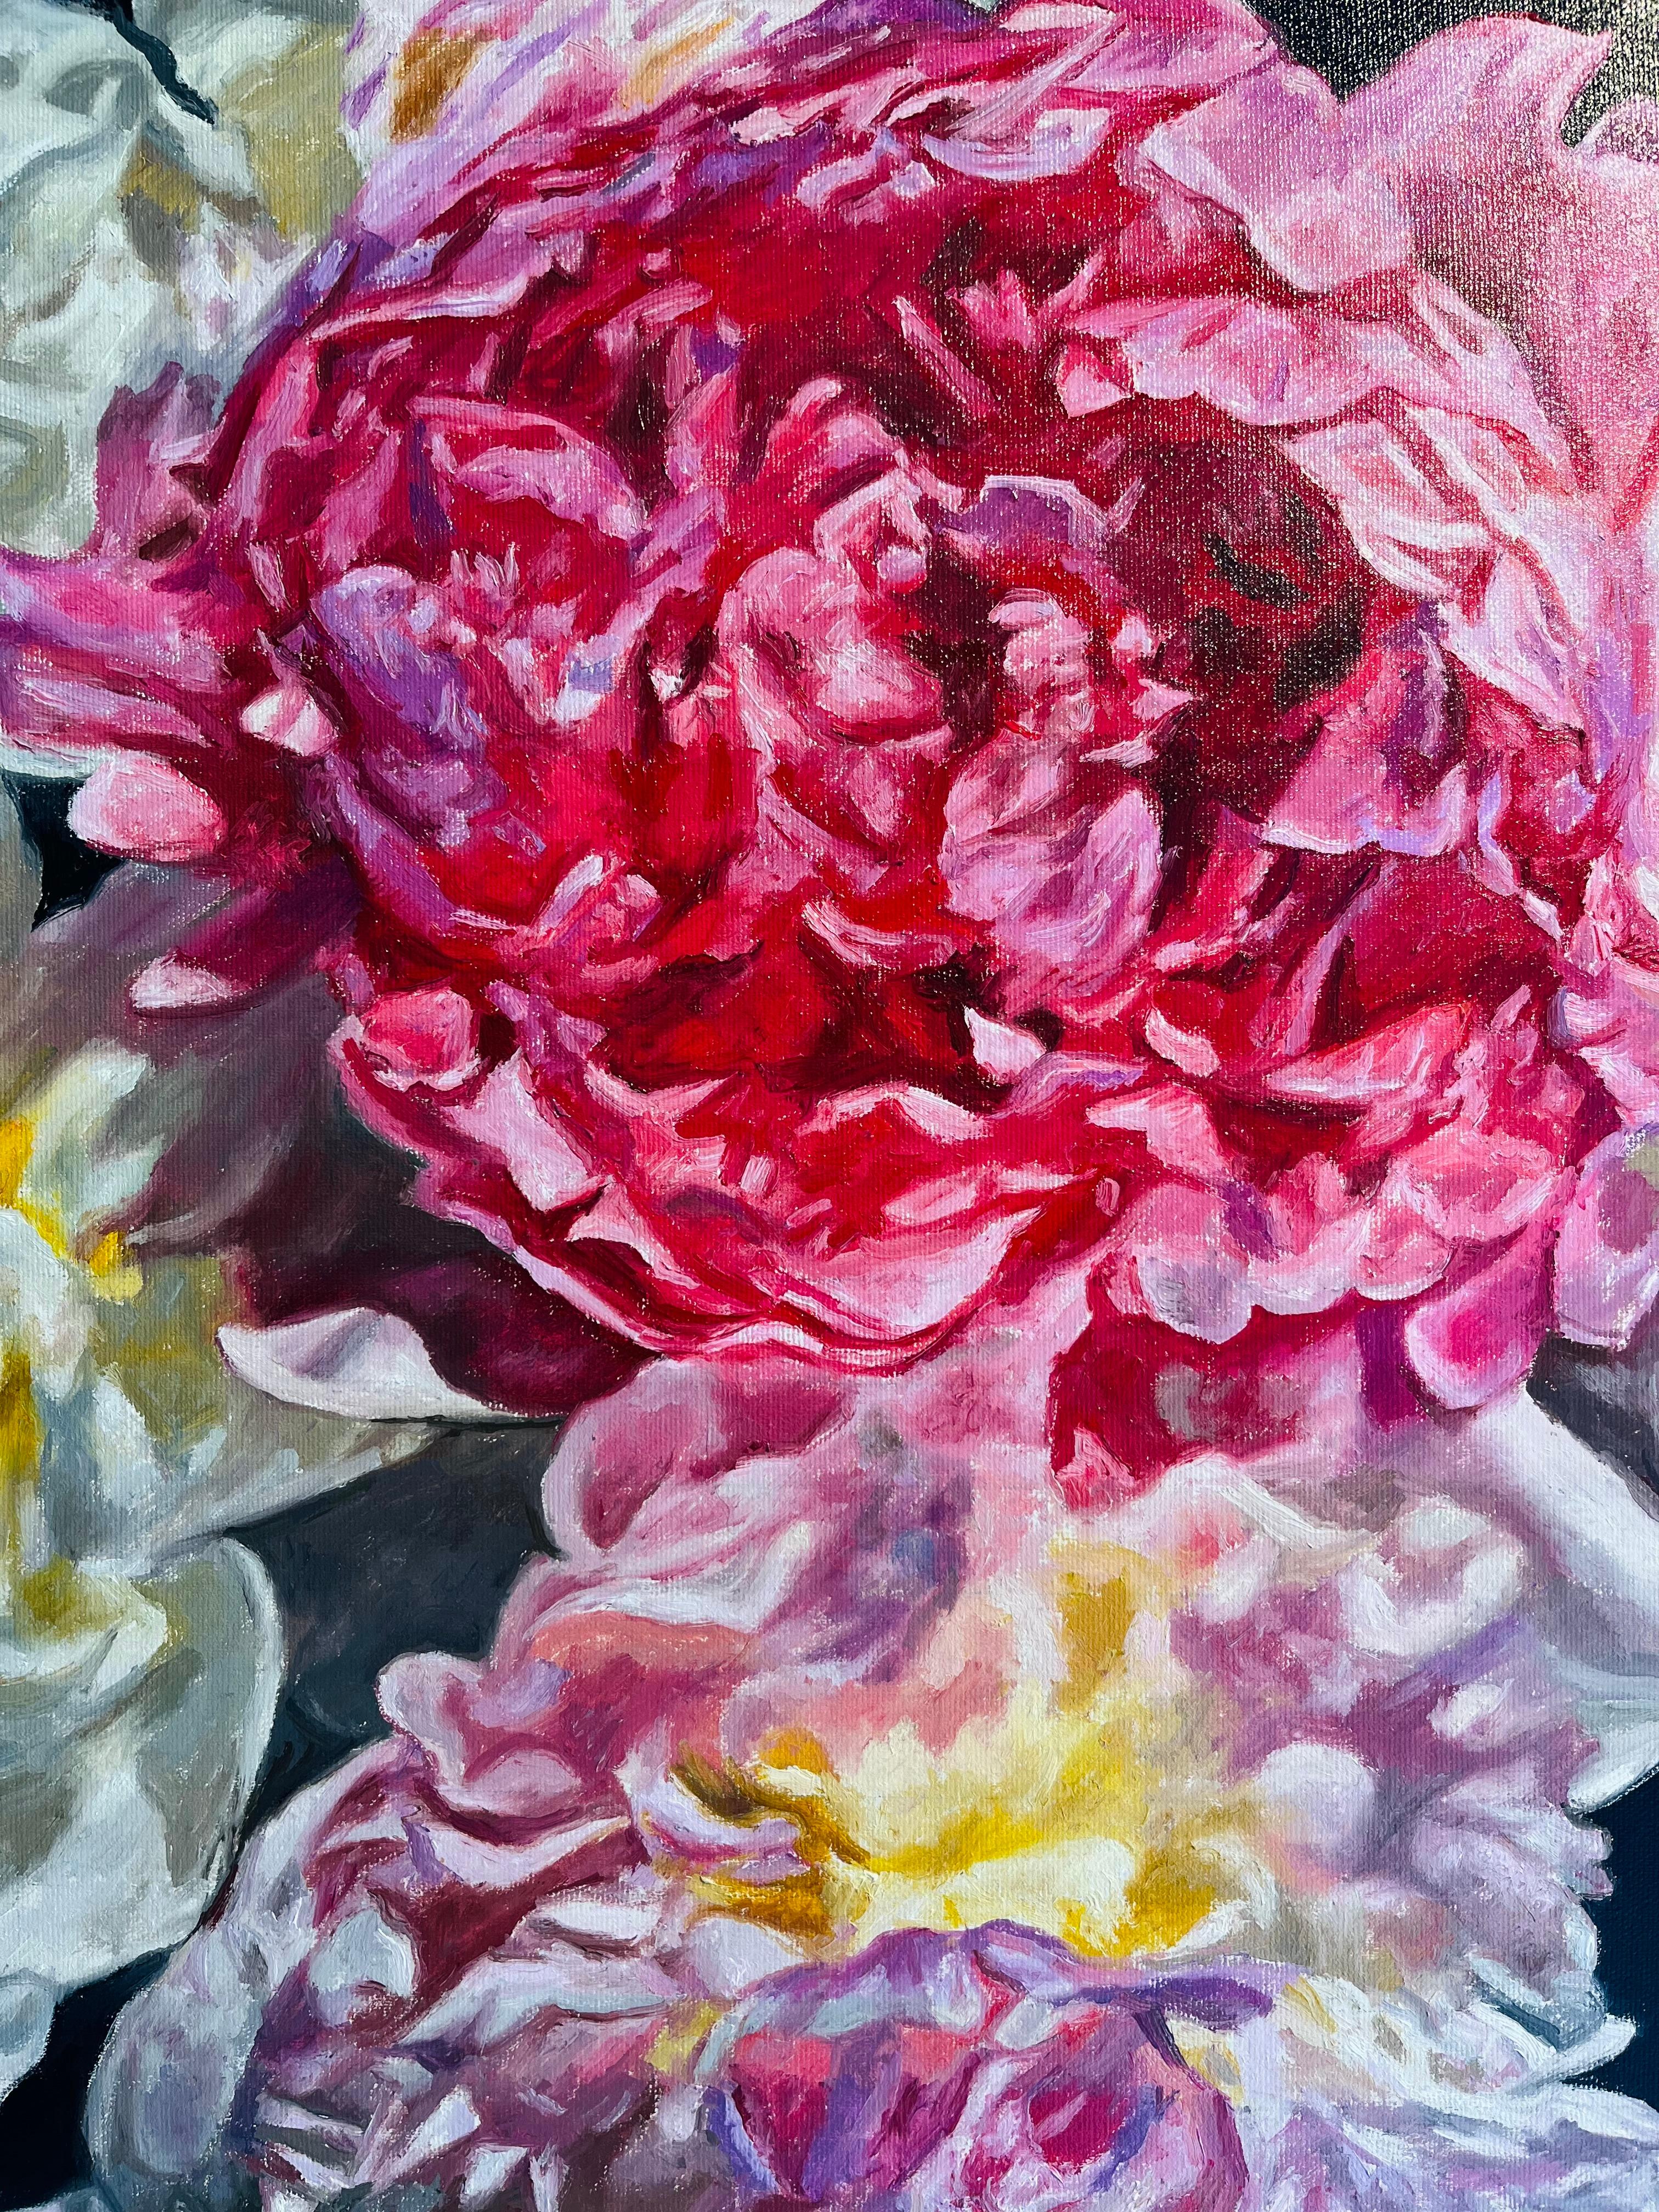 Pink and White Peonies-original modern realism floral painting-contemporary Art - Realist Painting by Robert Lemay